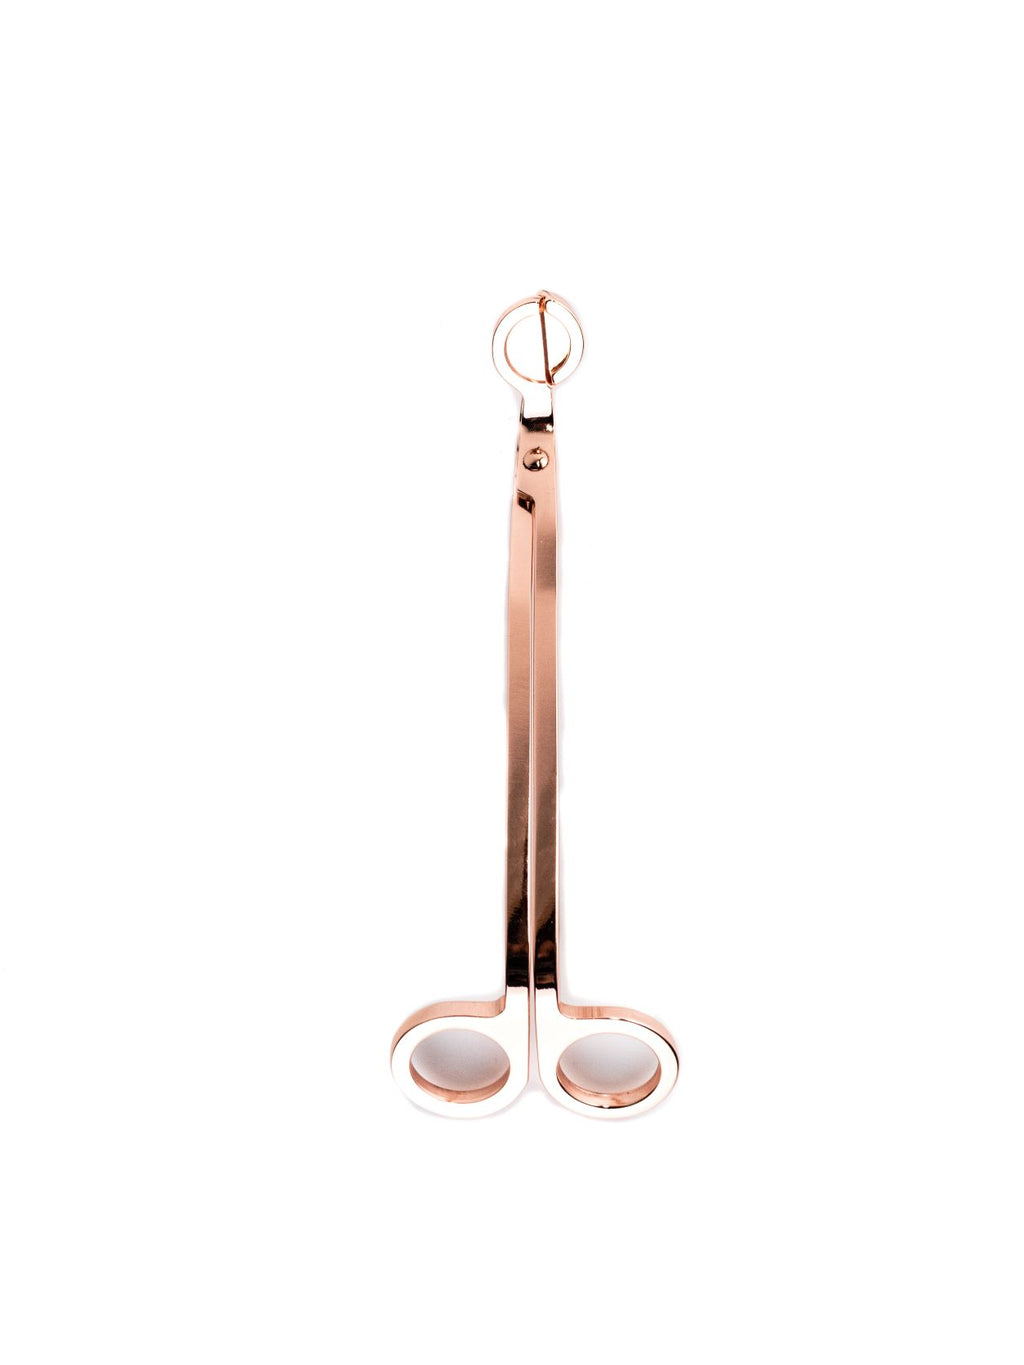 1 rose gold wick trimmer